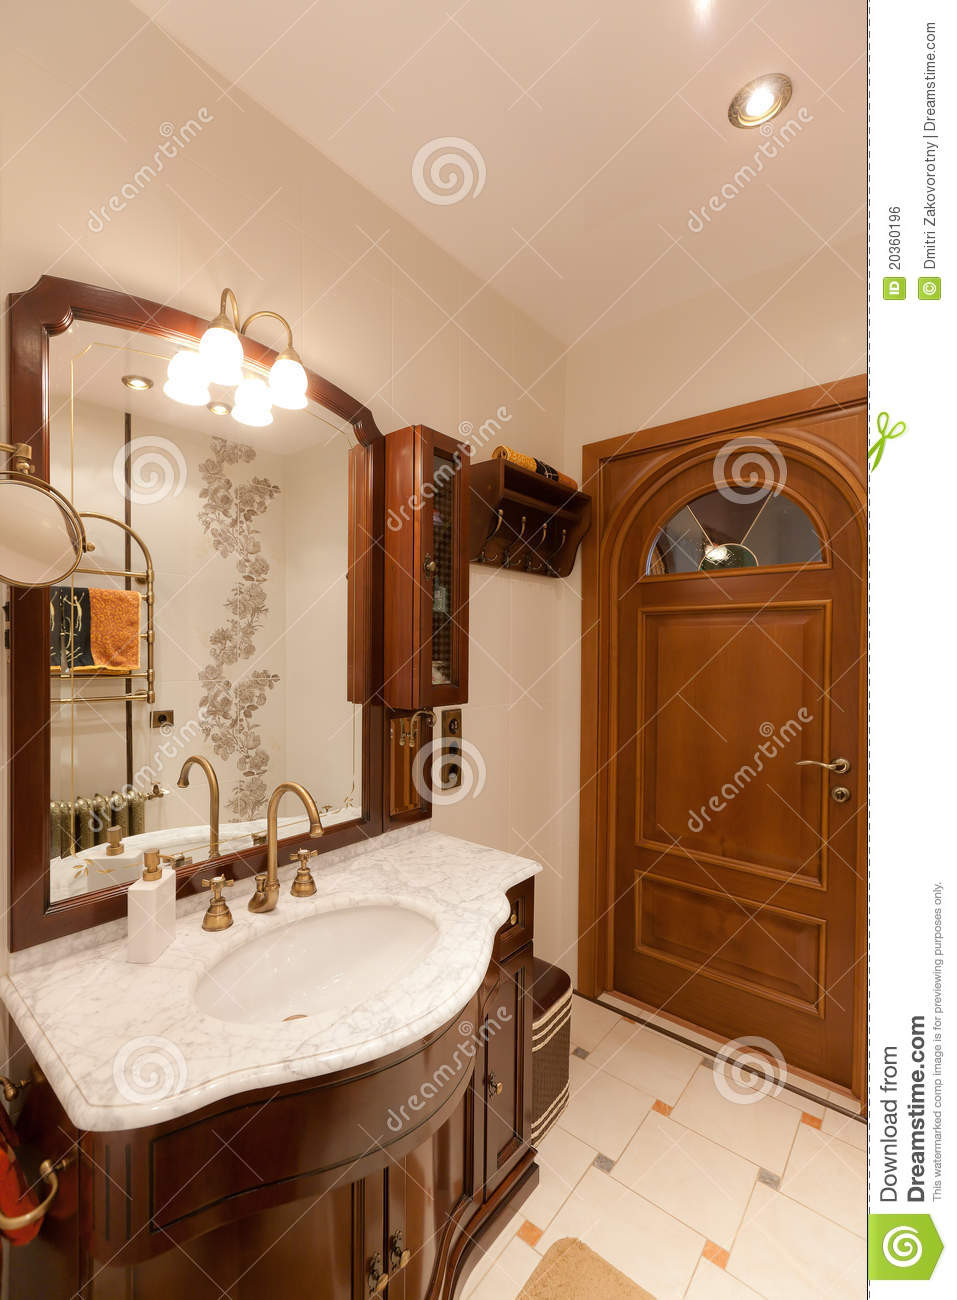 Bright Bathroom Colors
 Bathroom In Bright Colors Royalty Free Stock Image Image